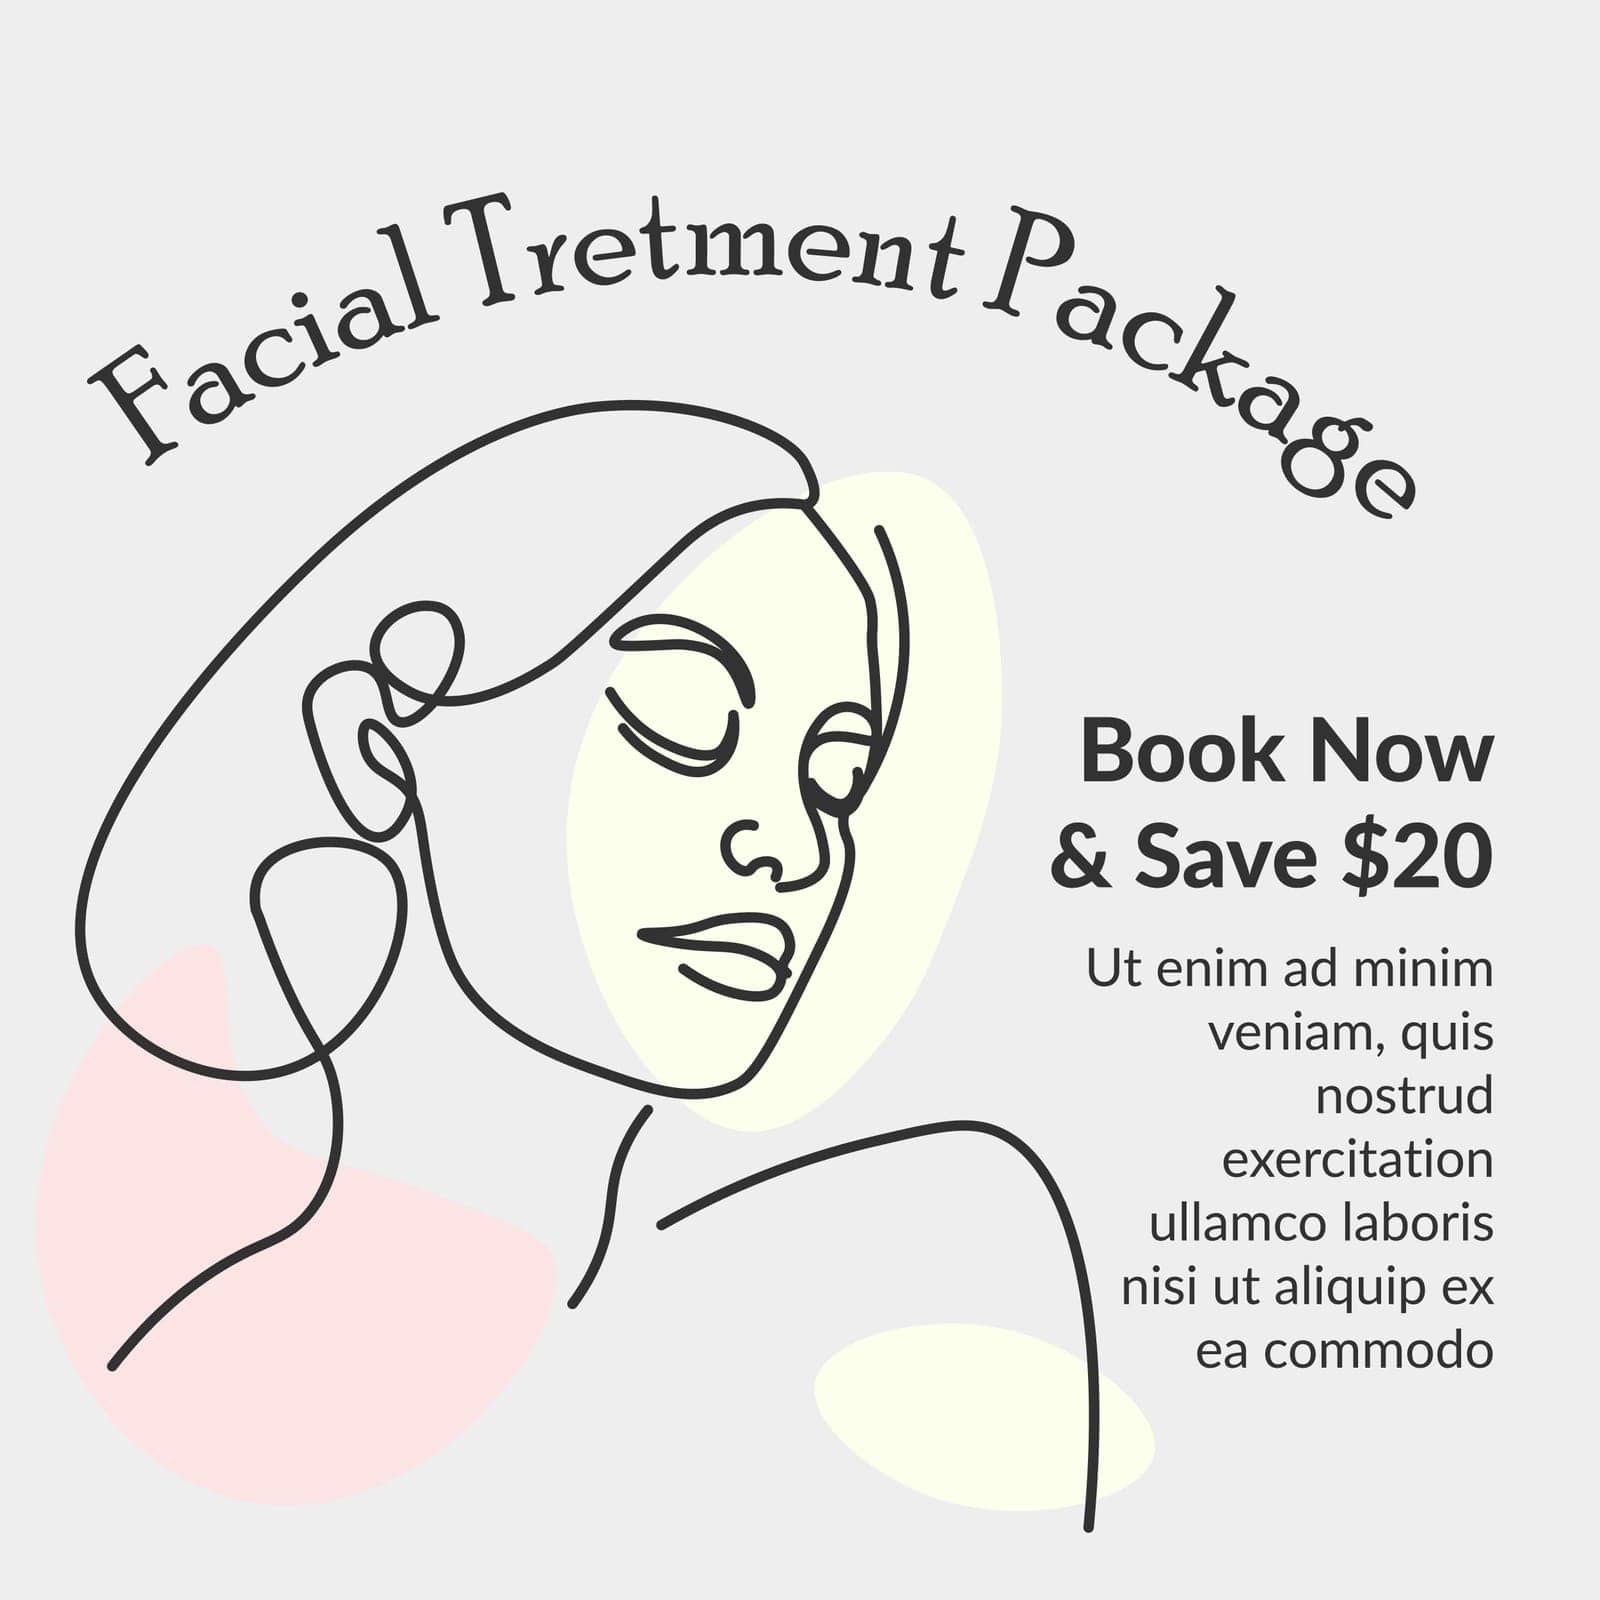 Facial treatment package, beauty care banners by Sonulkaster